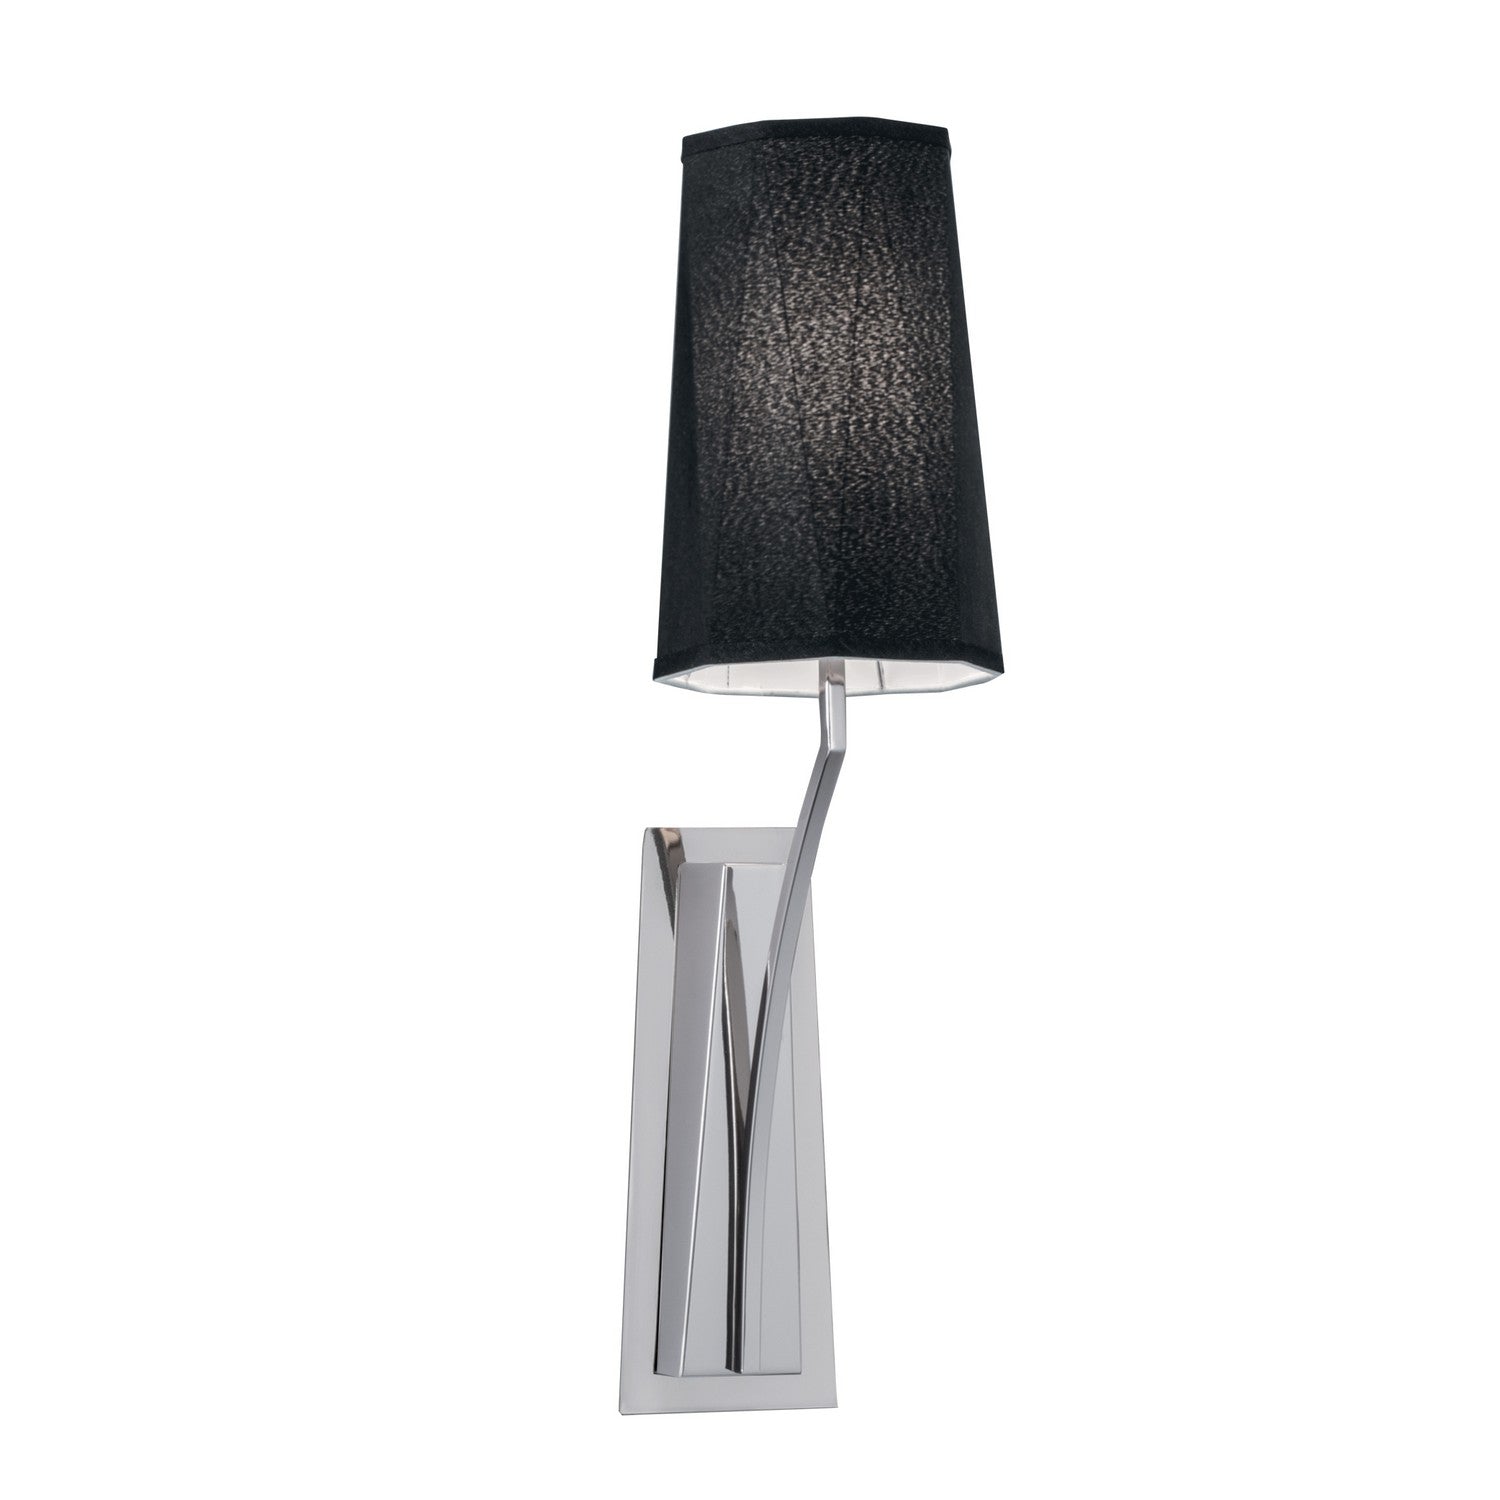 Norwell Diamond 8291-PN-BS Wall Light - Polished Nickel With Black Shade